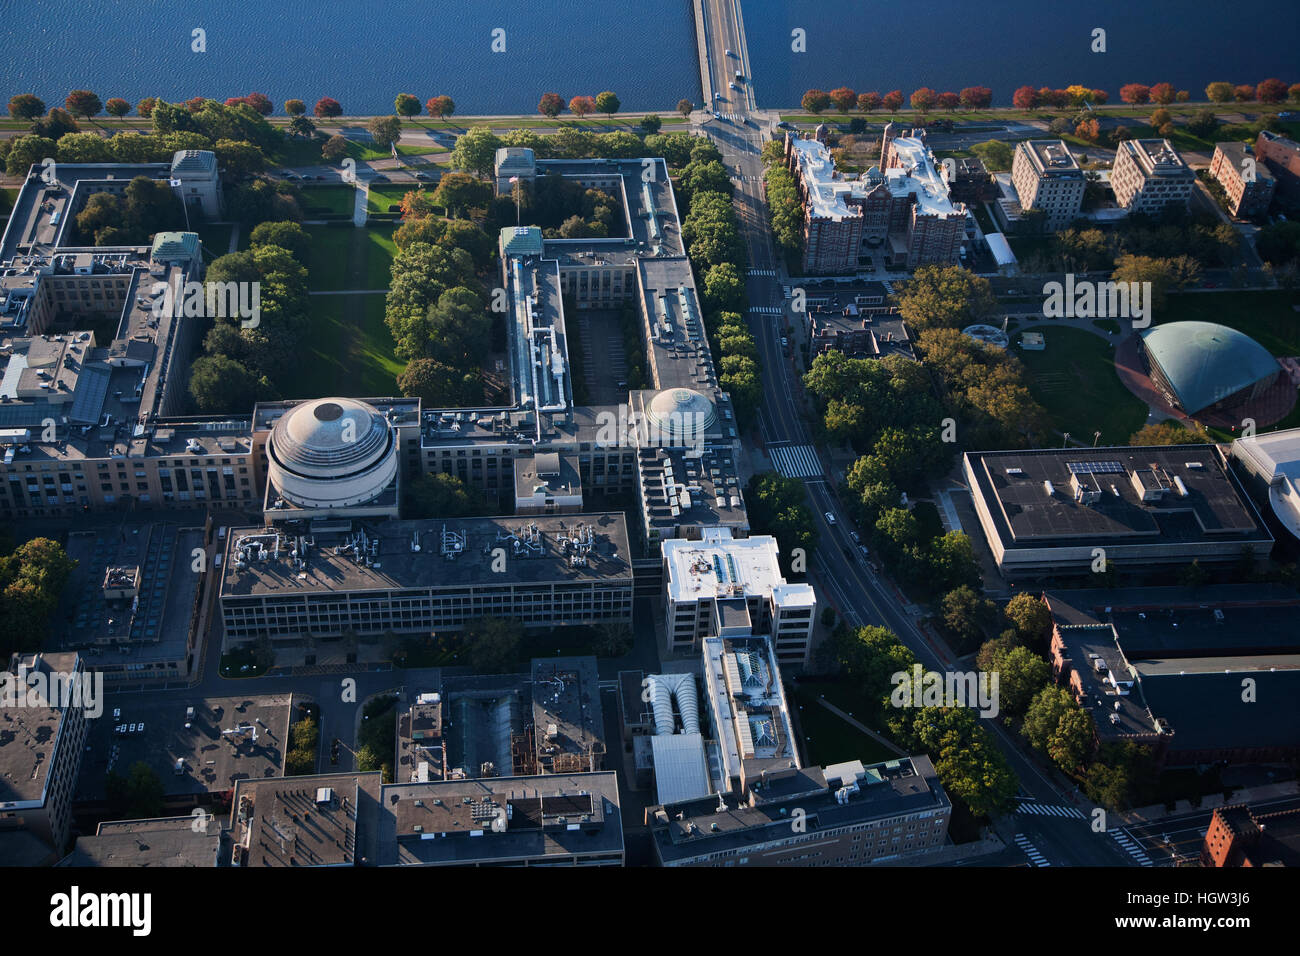 Campus of the Massachusetts Institute of Technology - Wikipedia